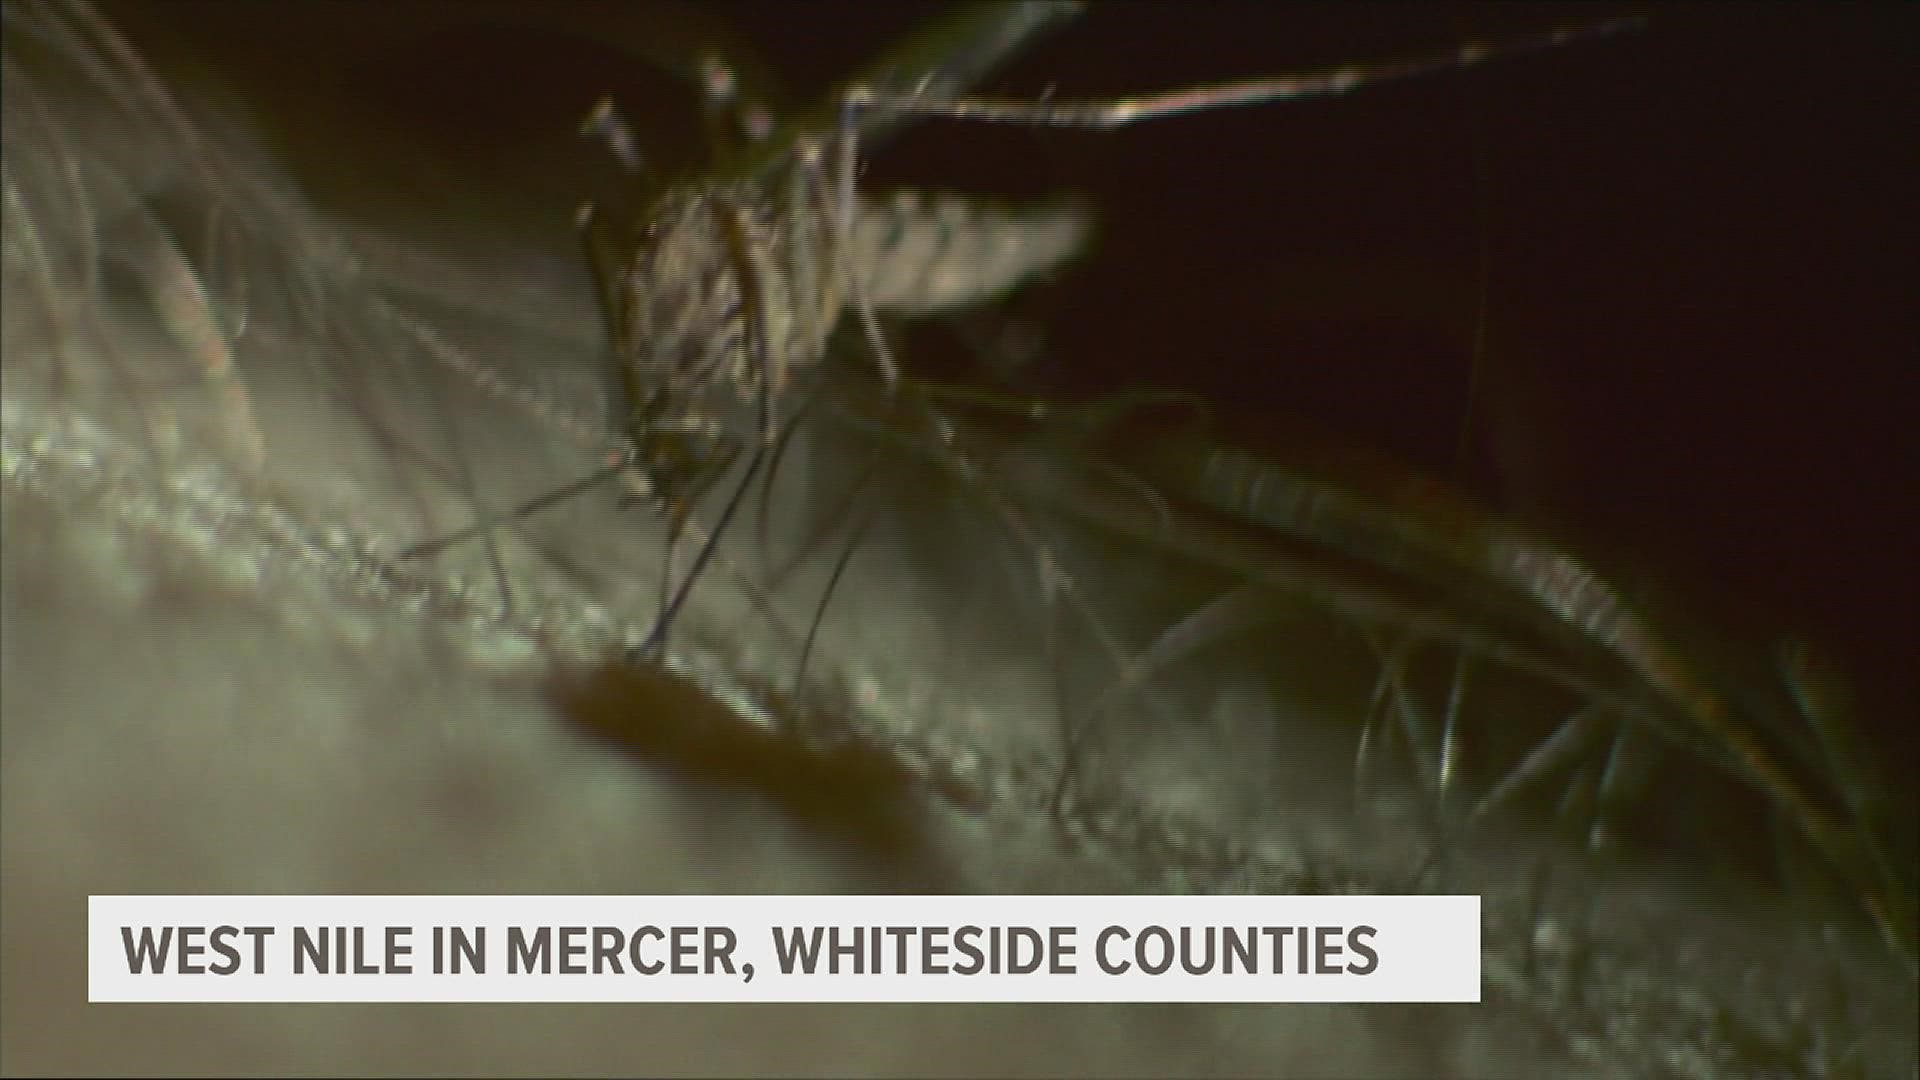 Local health officials have found West Nile virus in mosquitoes near Sterling in Whiteside County and in Mercer County.